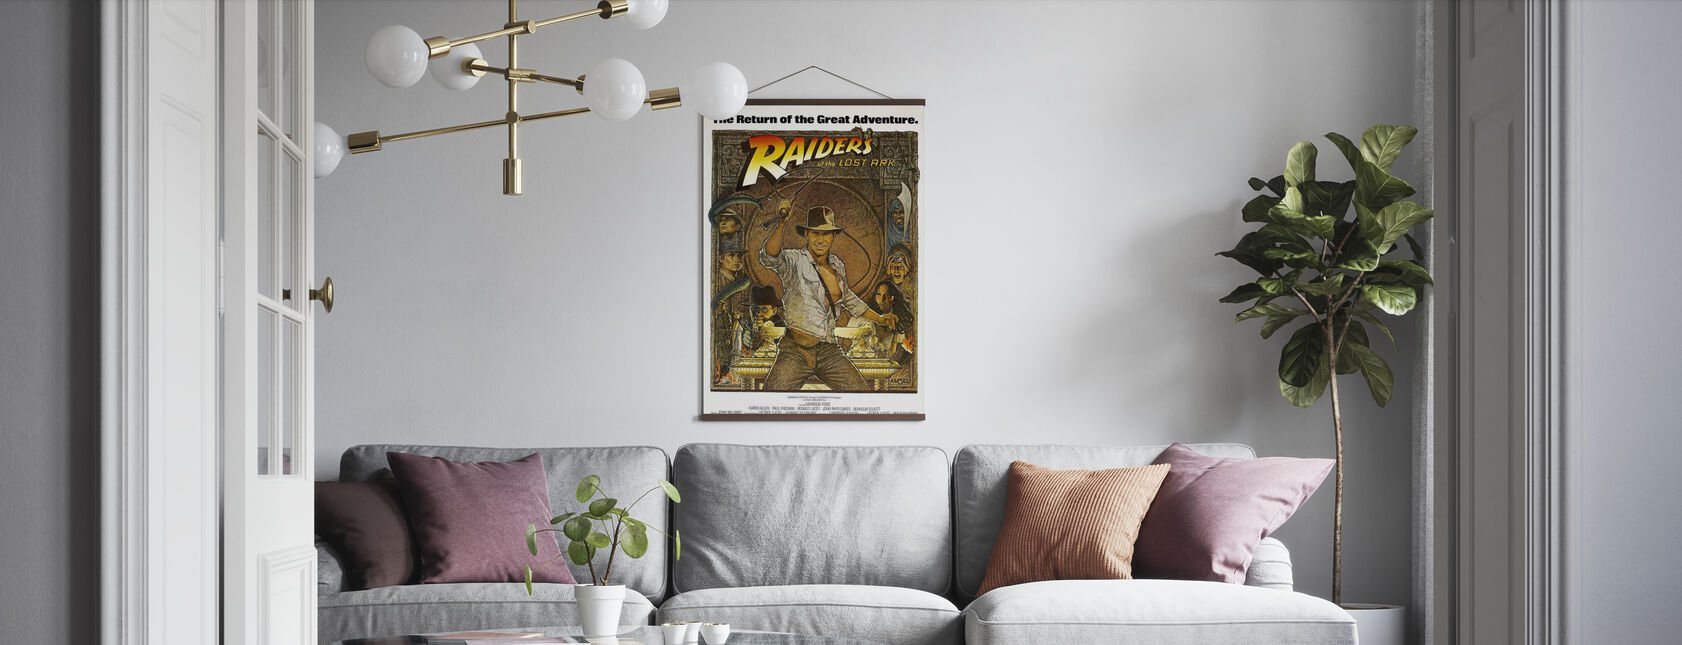 Raiders of the Lost Ark - Poster - Living Room